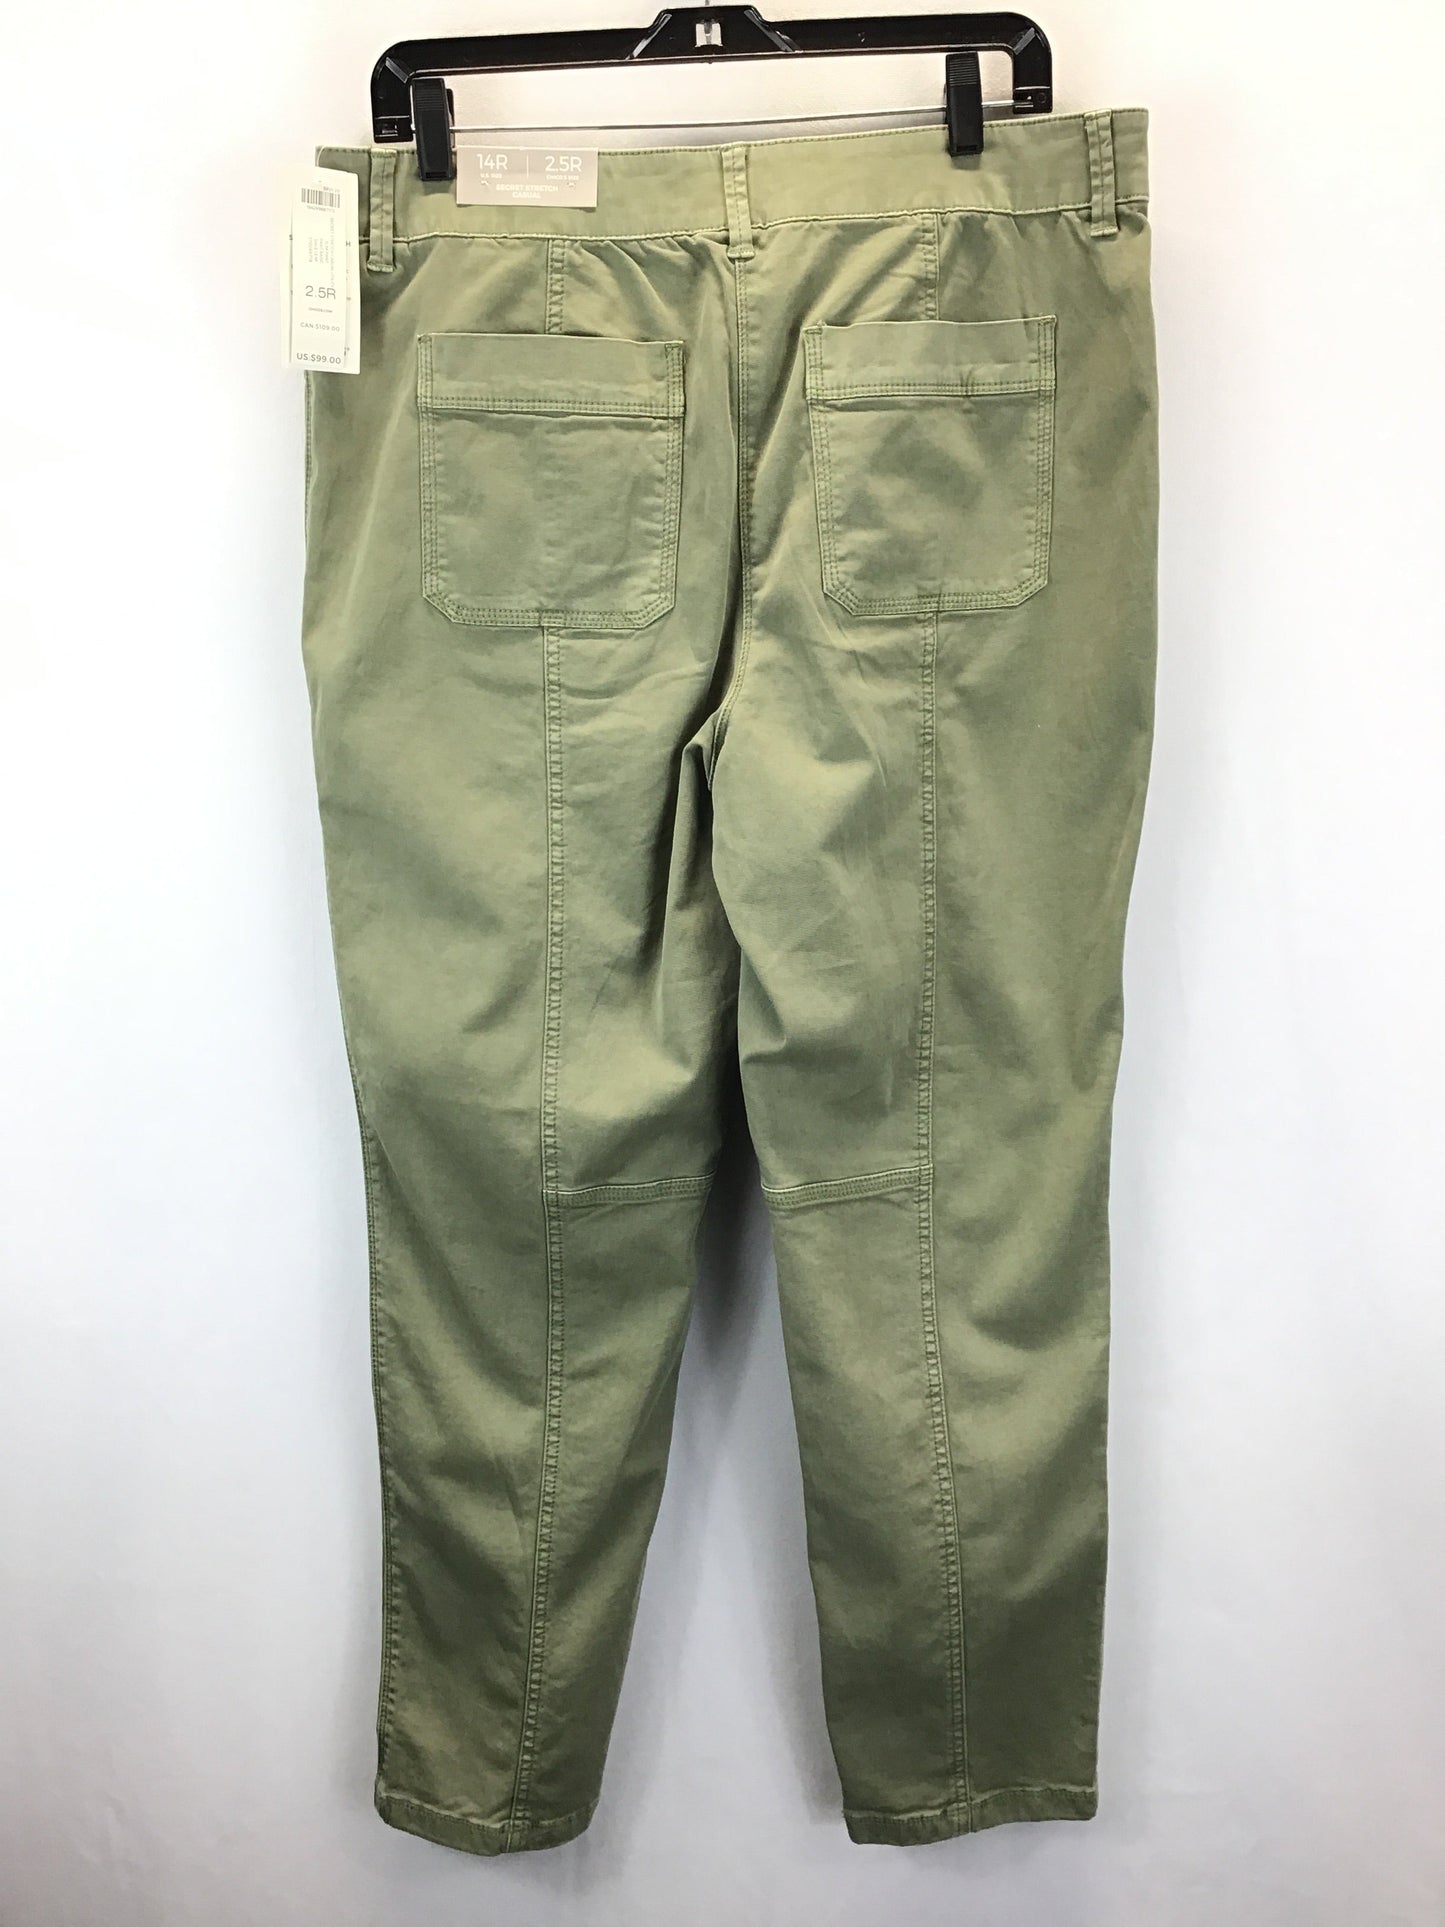 Green Pants Other Chicos, Size 14